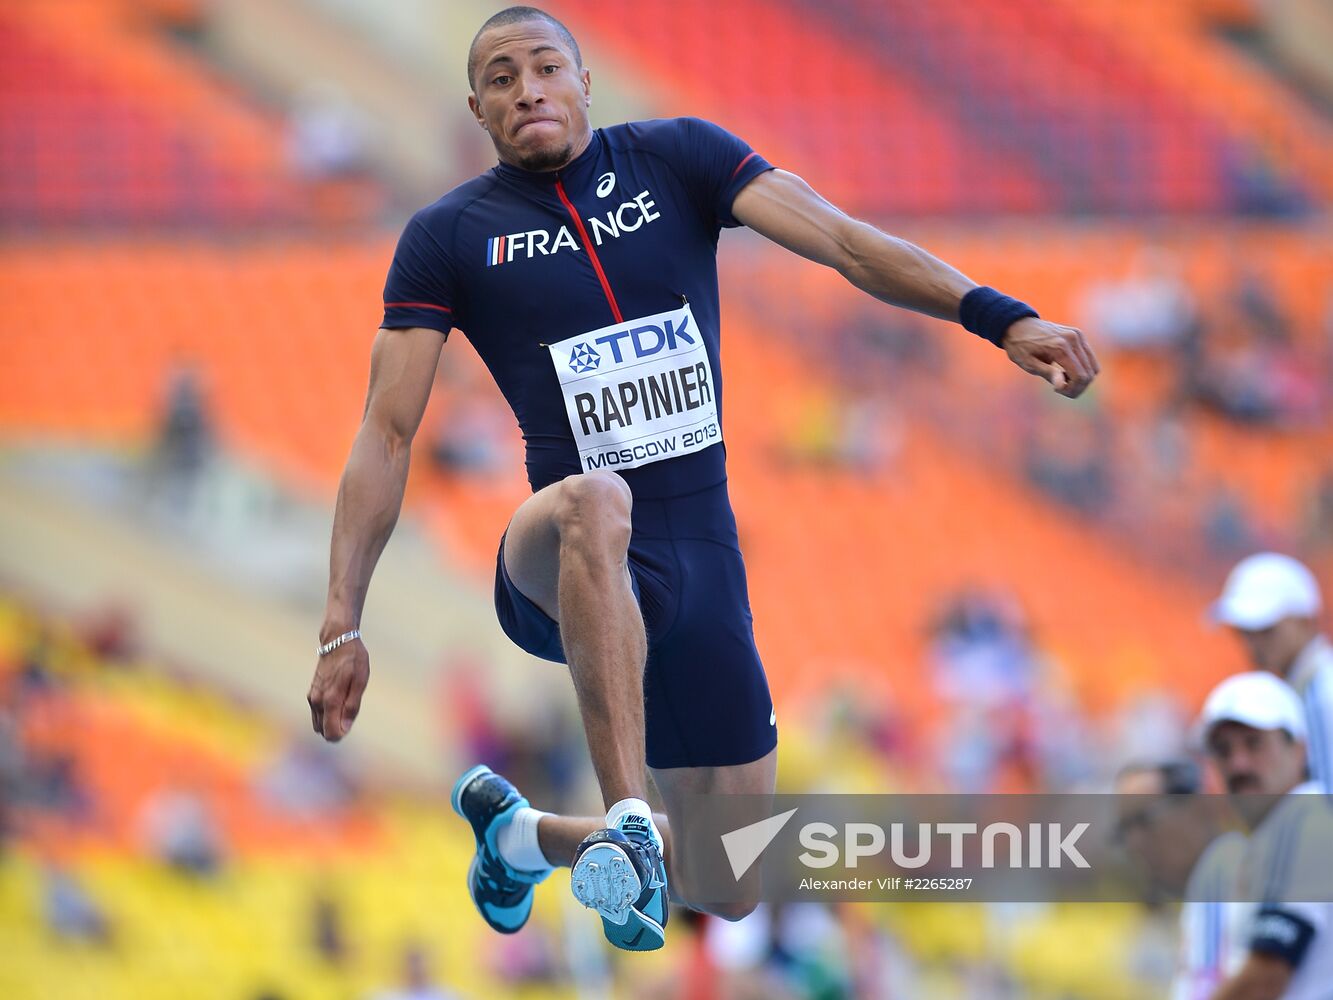 2013 IAAF World Championships. Day Seven. Morning session